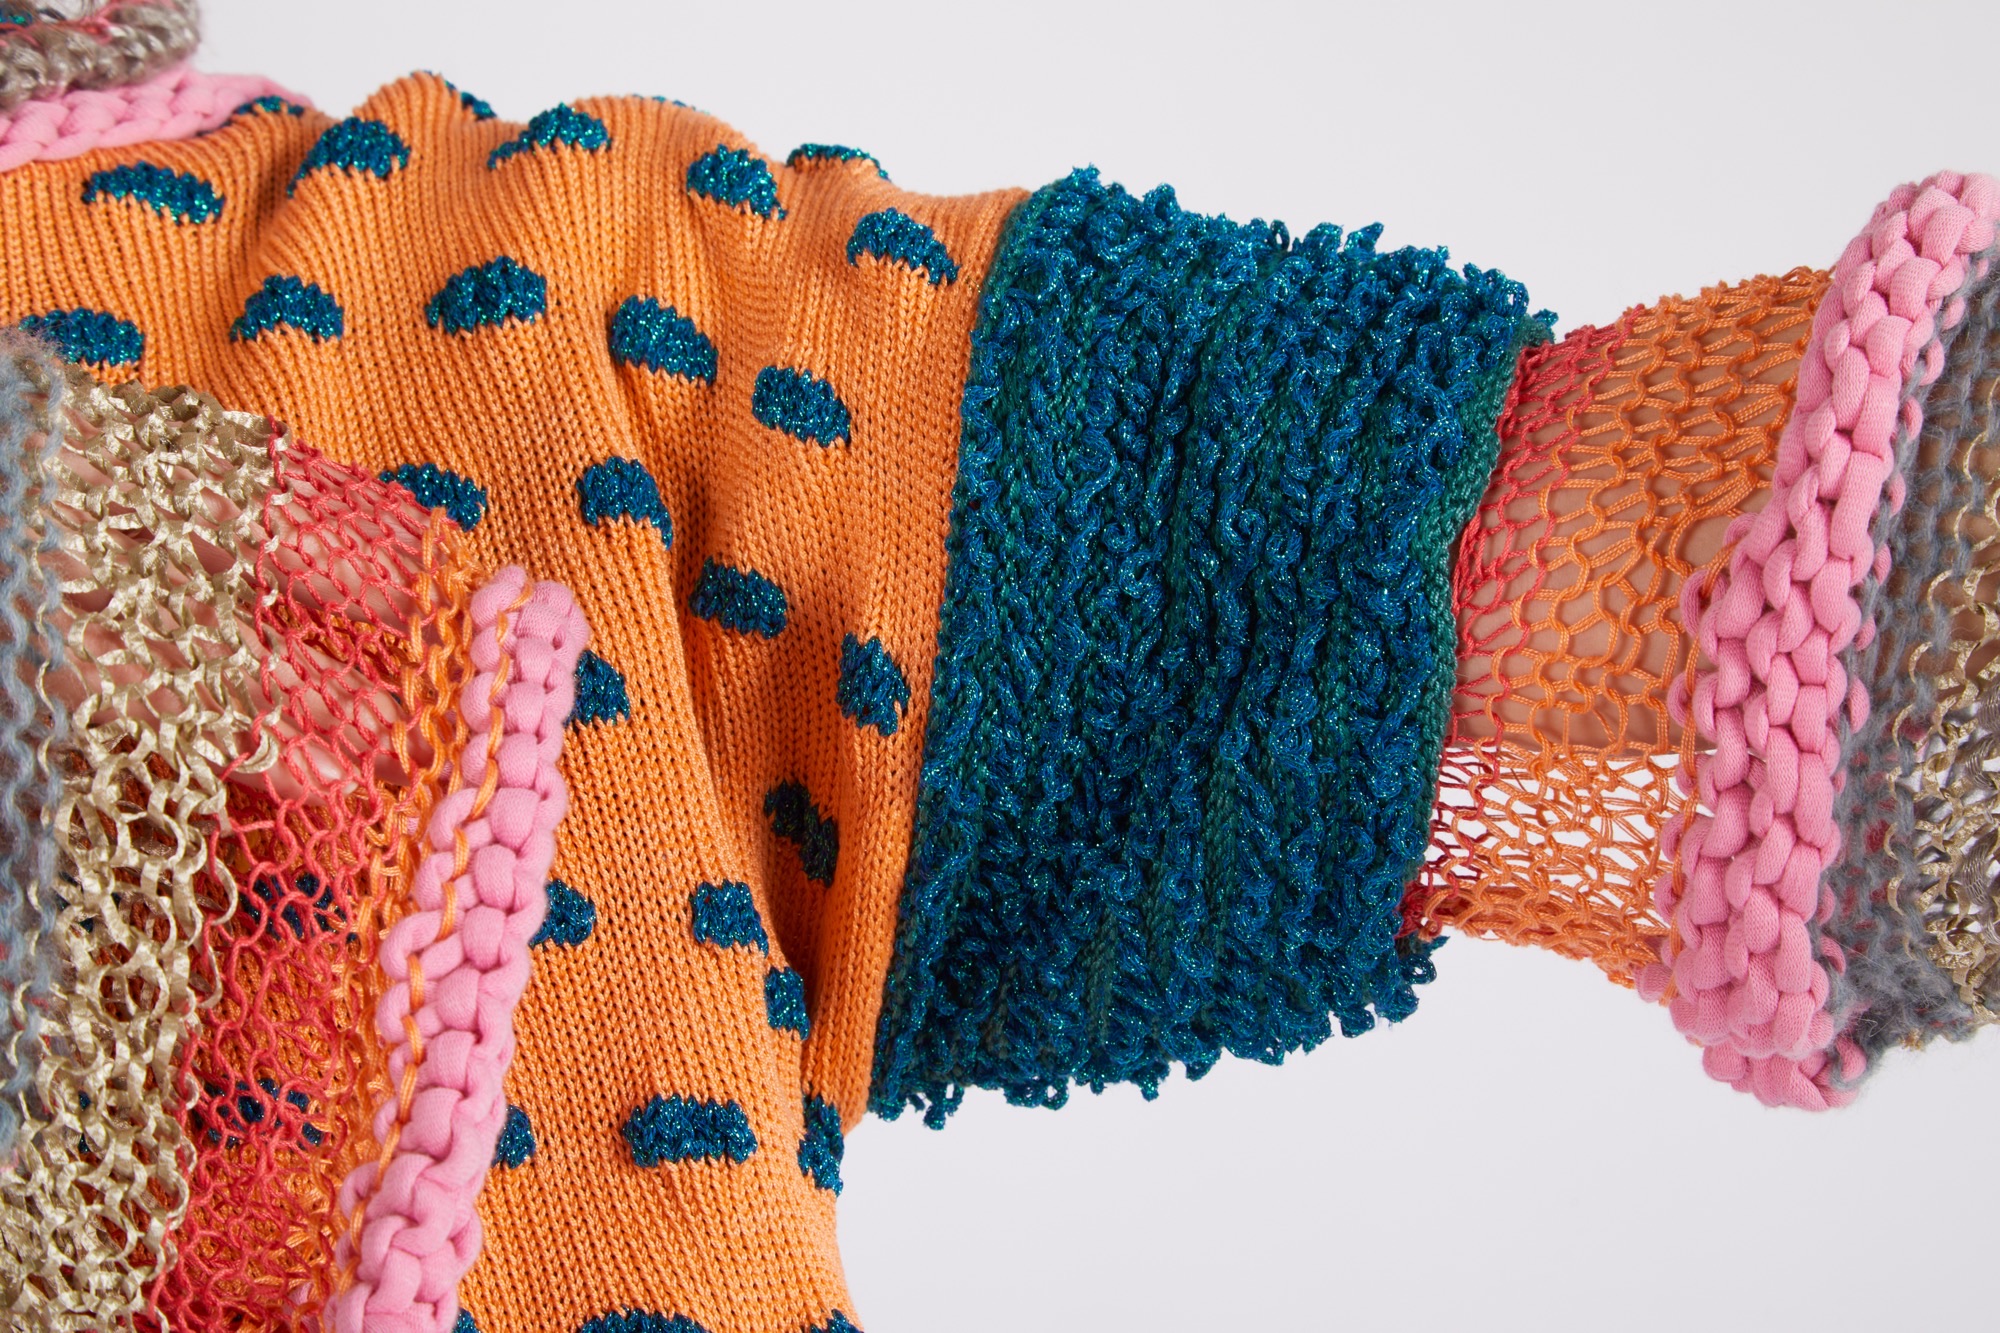 Be Bold garment by Ria Drake. Showing a close-up of a playful garment that combines different reclaimed fibres.